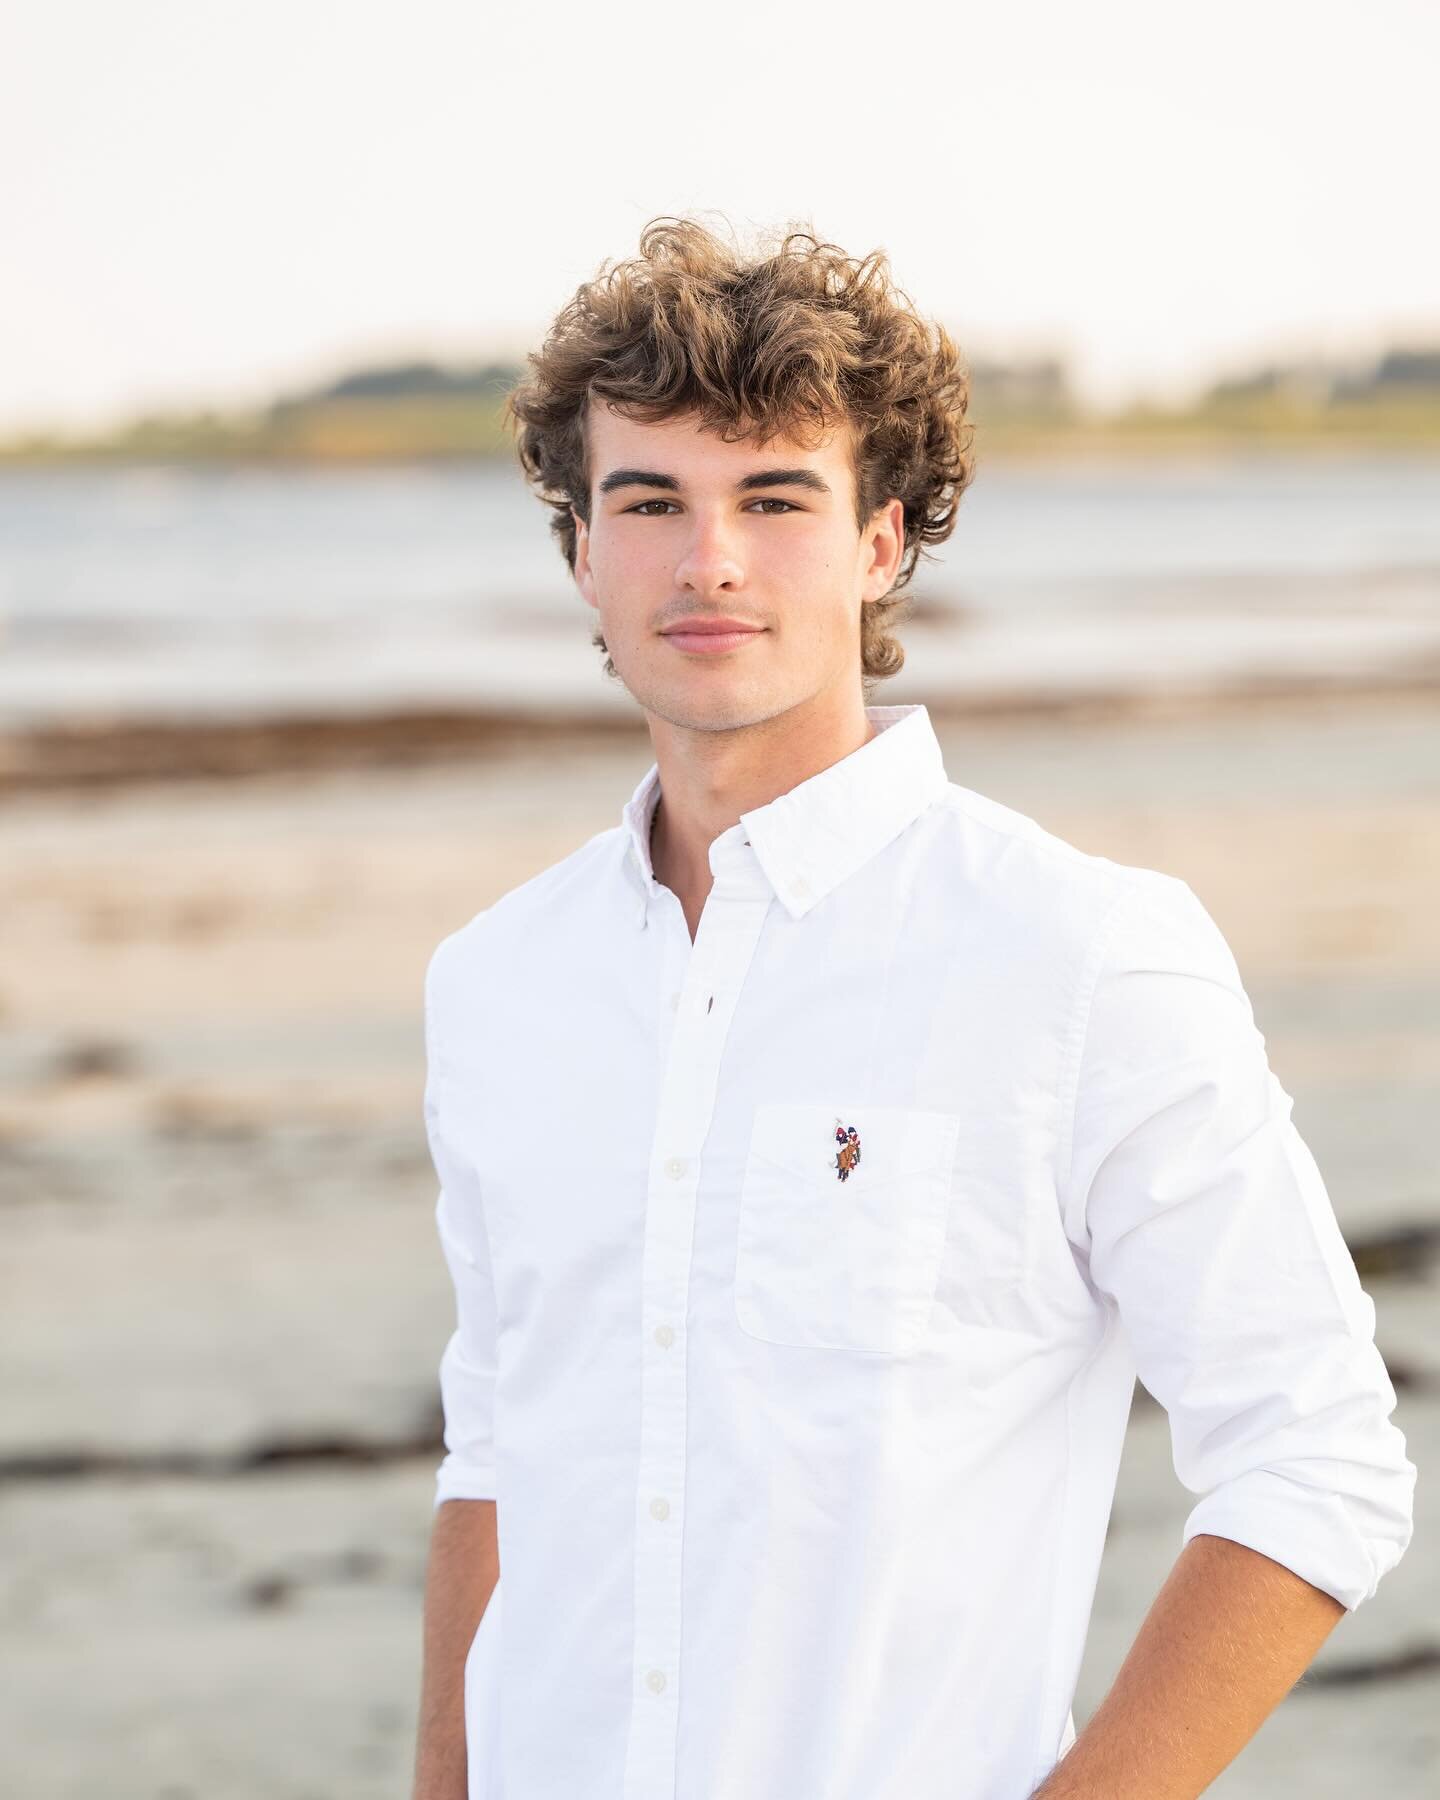 Congratulations to Mason from Scarborough, ME on his decision to attend Florida State University as an exercise science major on the pre-med track! It has been a pleasure working with your sweet family over the years (we placed his older sister at Ba